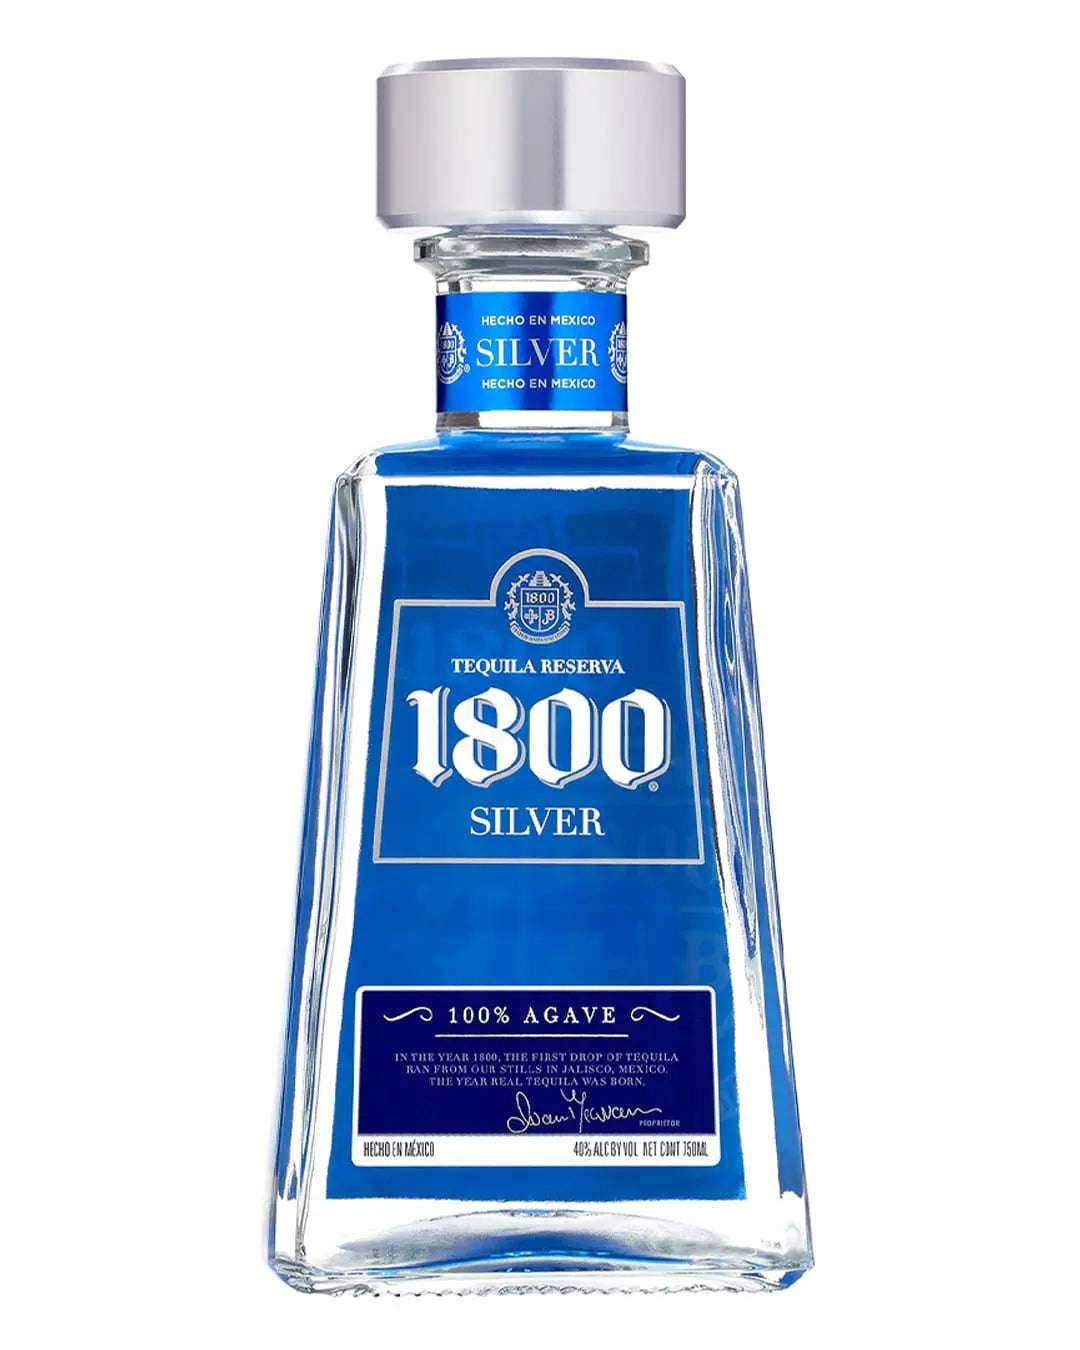 1800 Tequila Silver Reserva, 70 cl Tequila & Mezcal 7501035013117